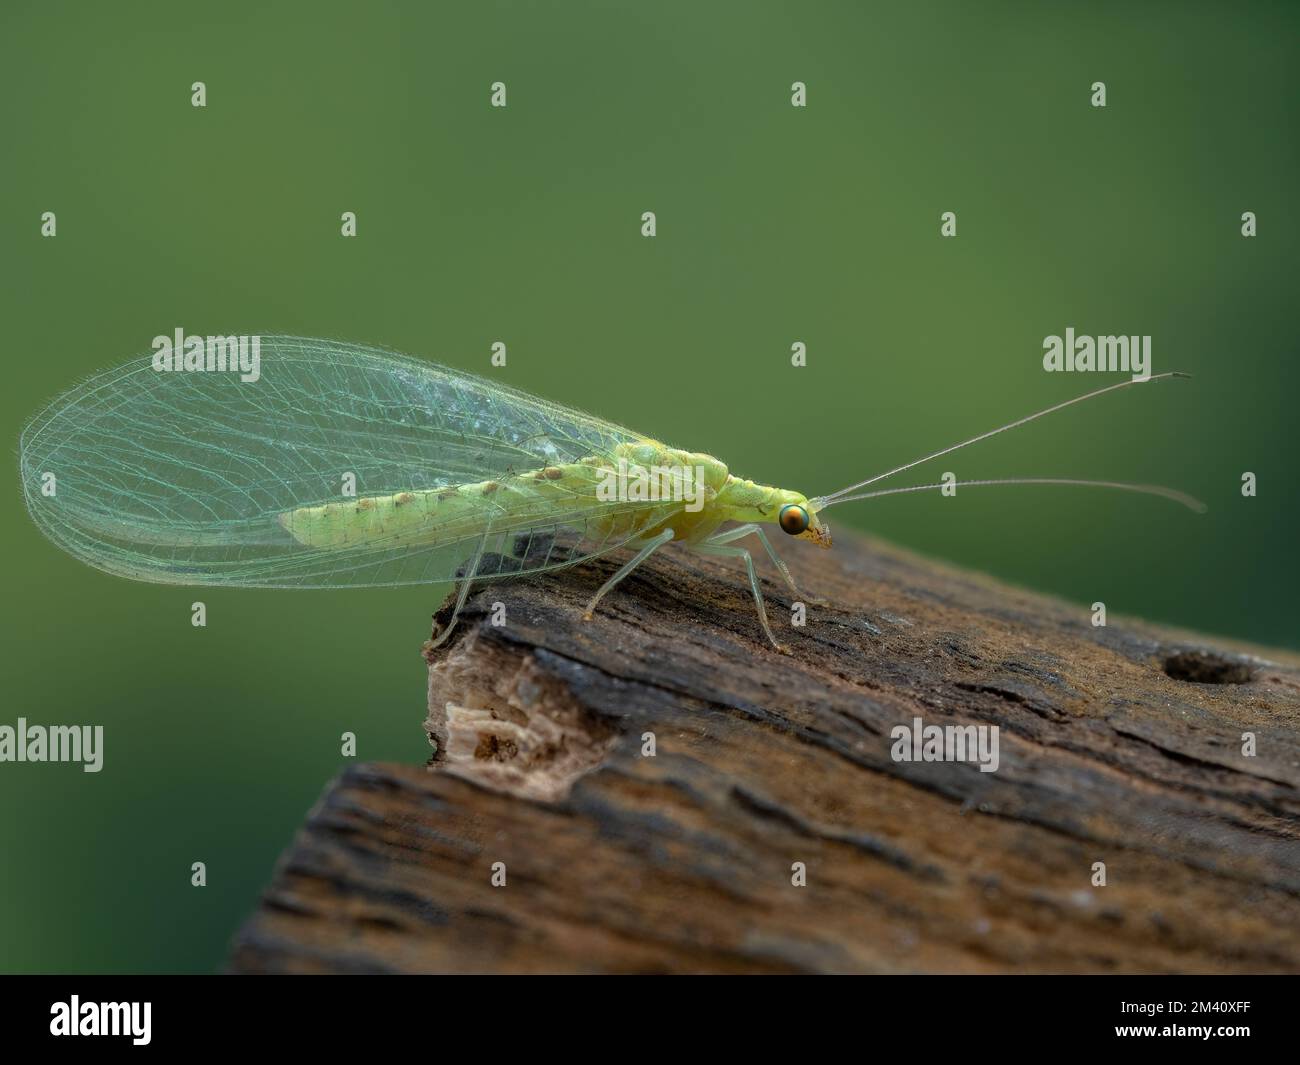 Side view of a pretty green lacewing, family Chrysopidae, resting on a piece of wood Stock Photo